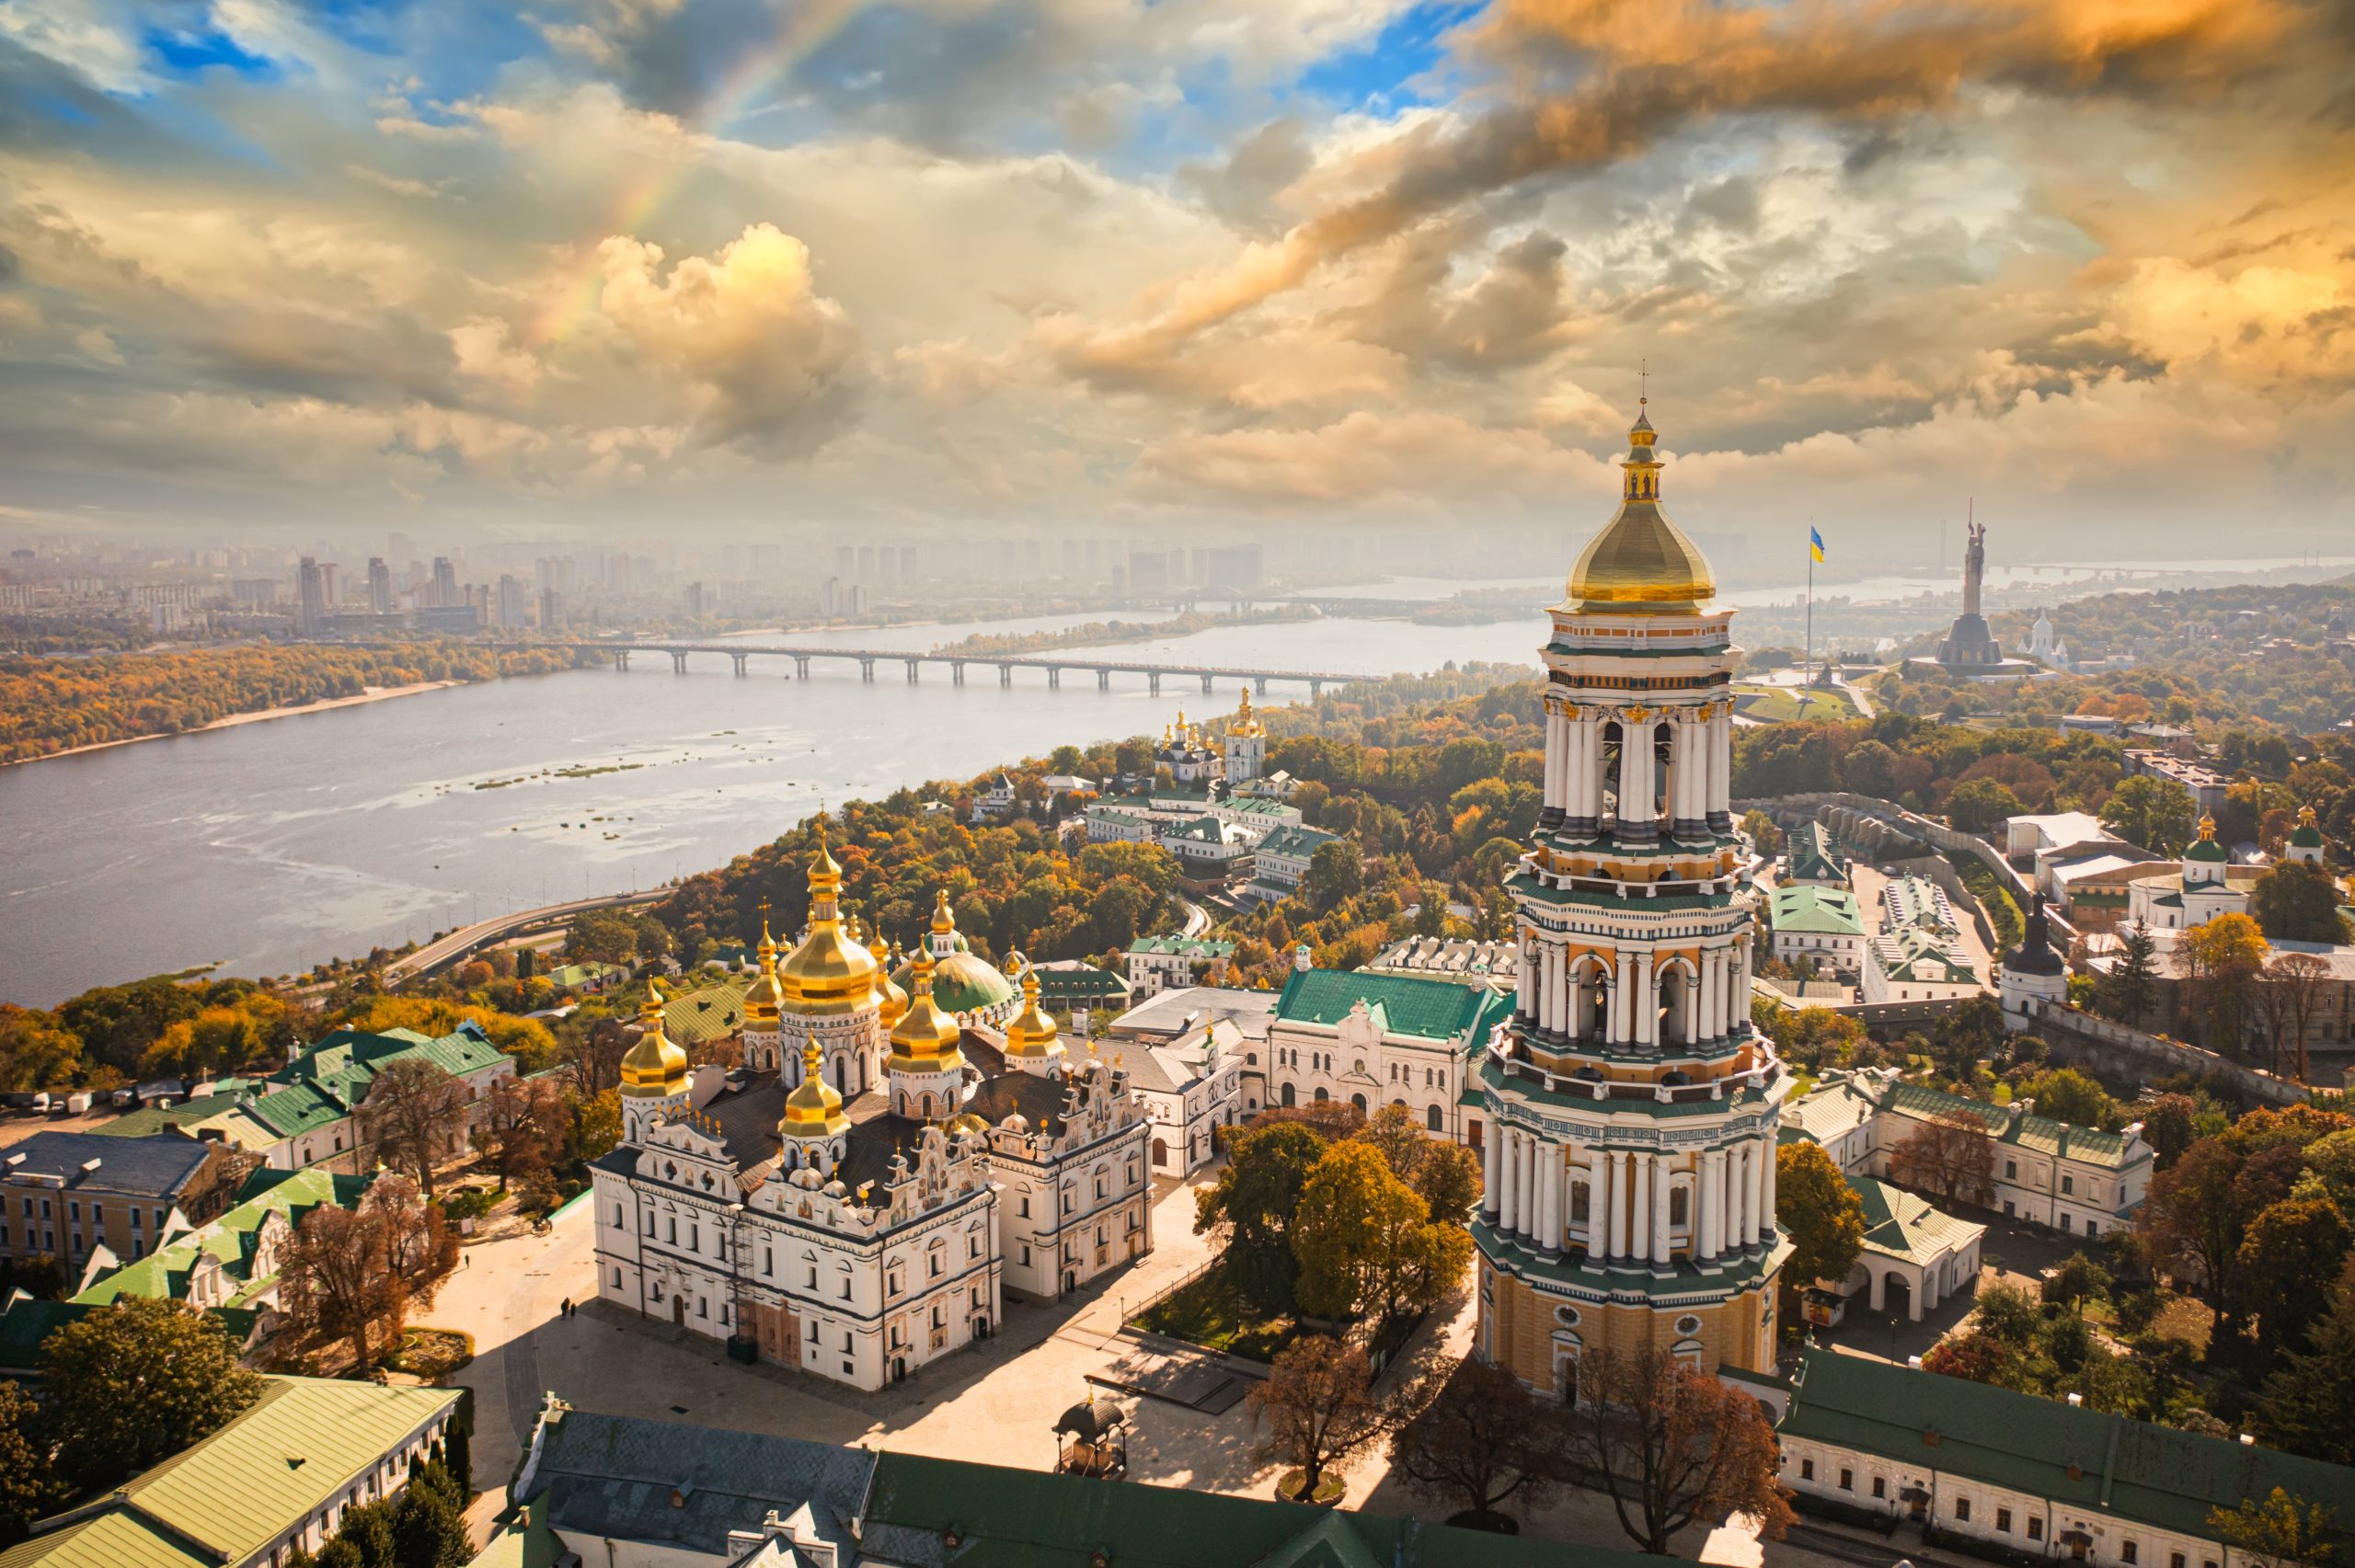 Locaria’s Chief Operating Officer, Lindsay Hong, Shares Insights in The Drum’s ‘How Advertising Firms Are Helping Rebuild Ukraine’s Ad Sector’ Feature